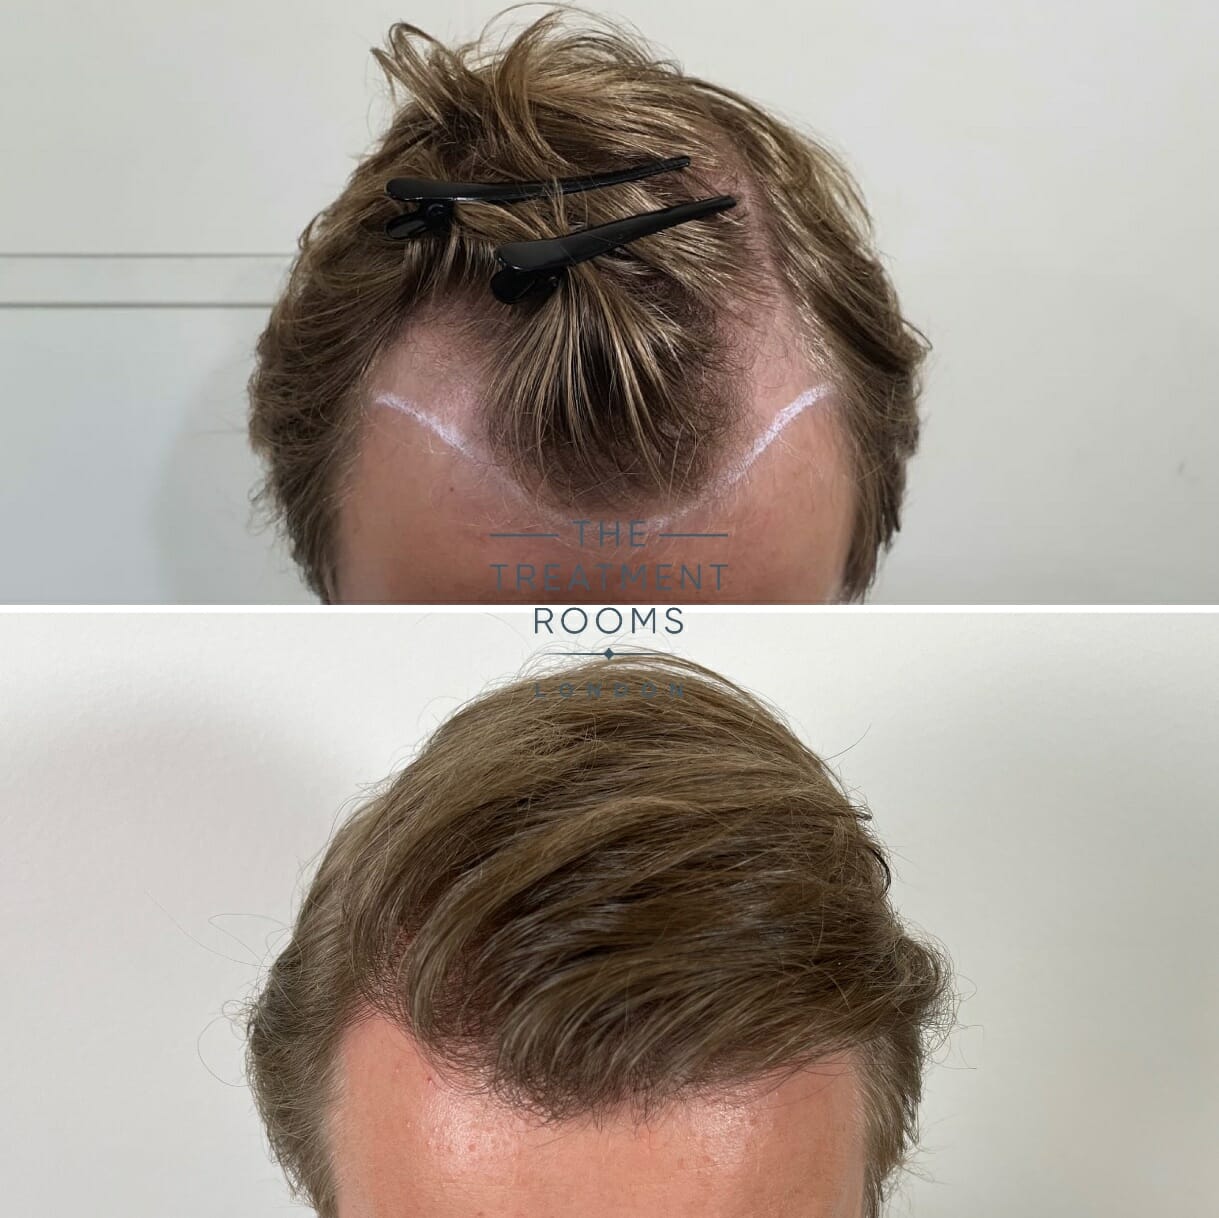 Hair Transplant Timeline: What To Expect | Treatment Rooms